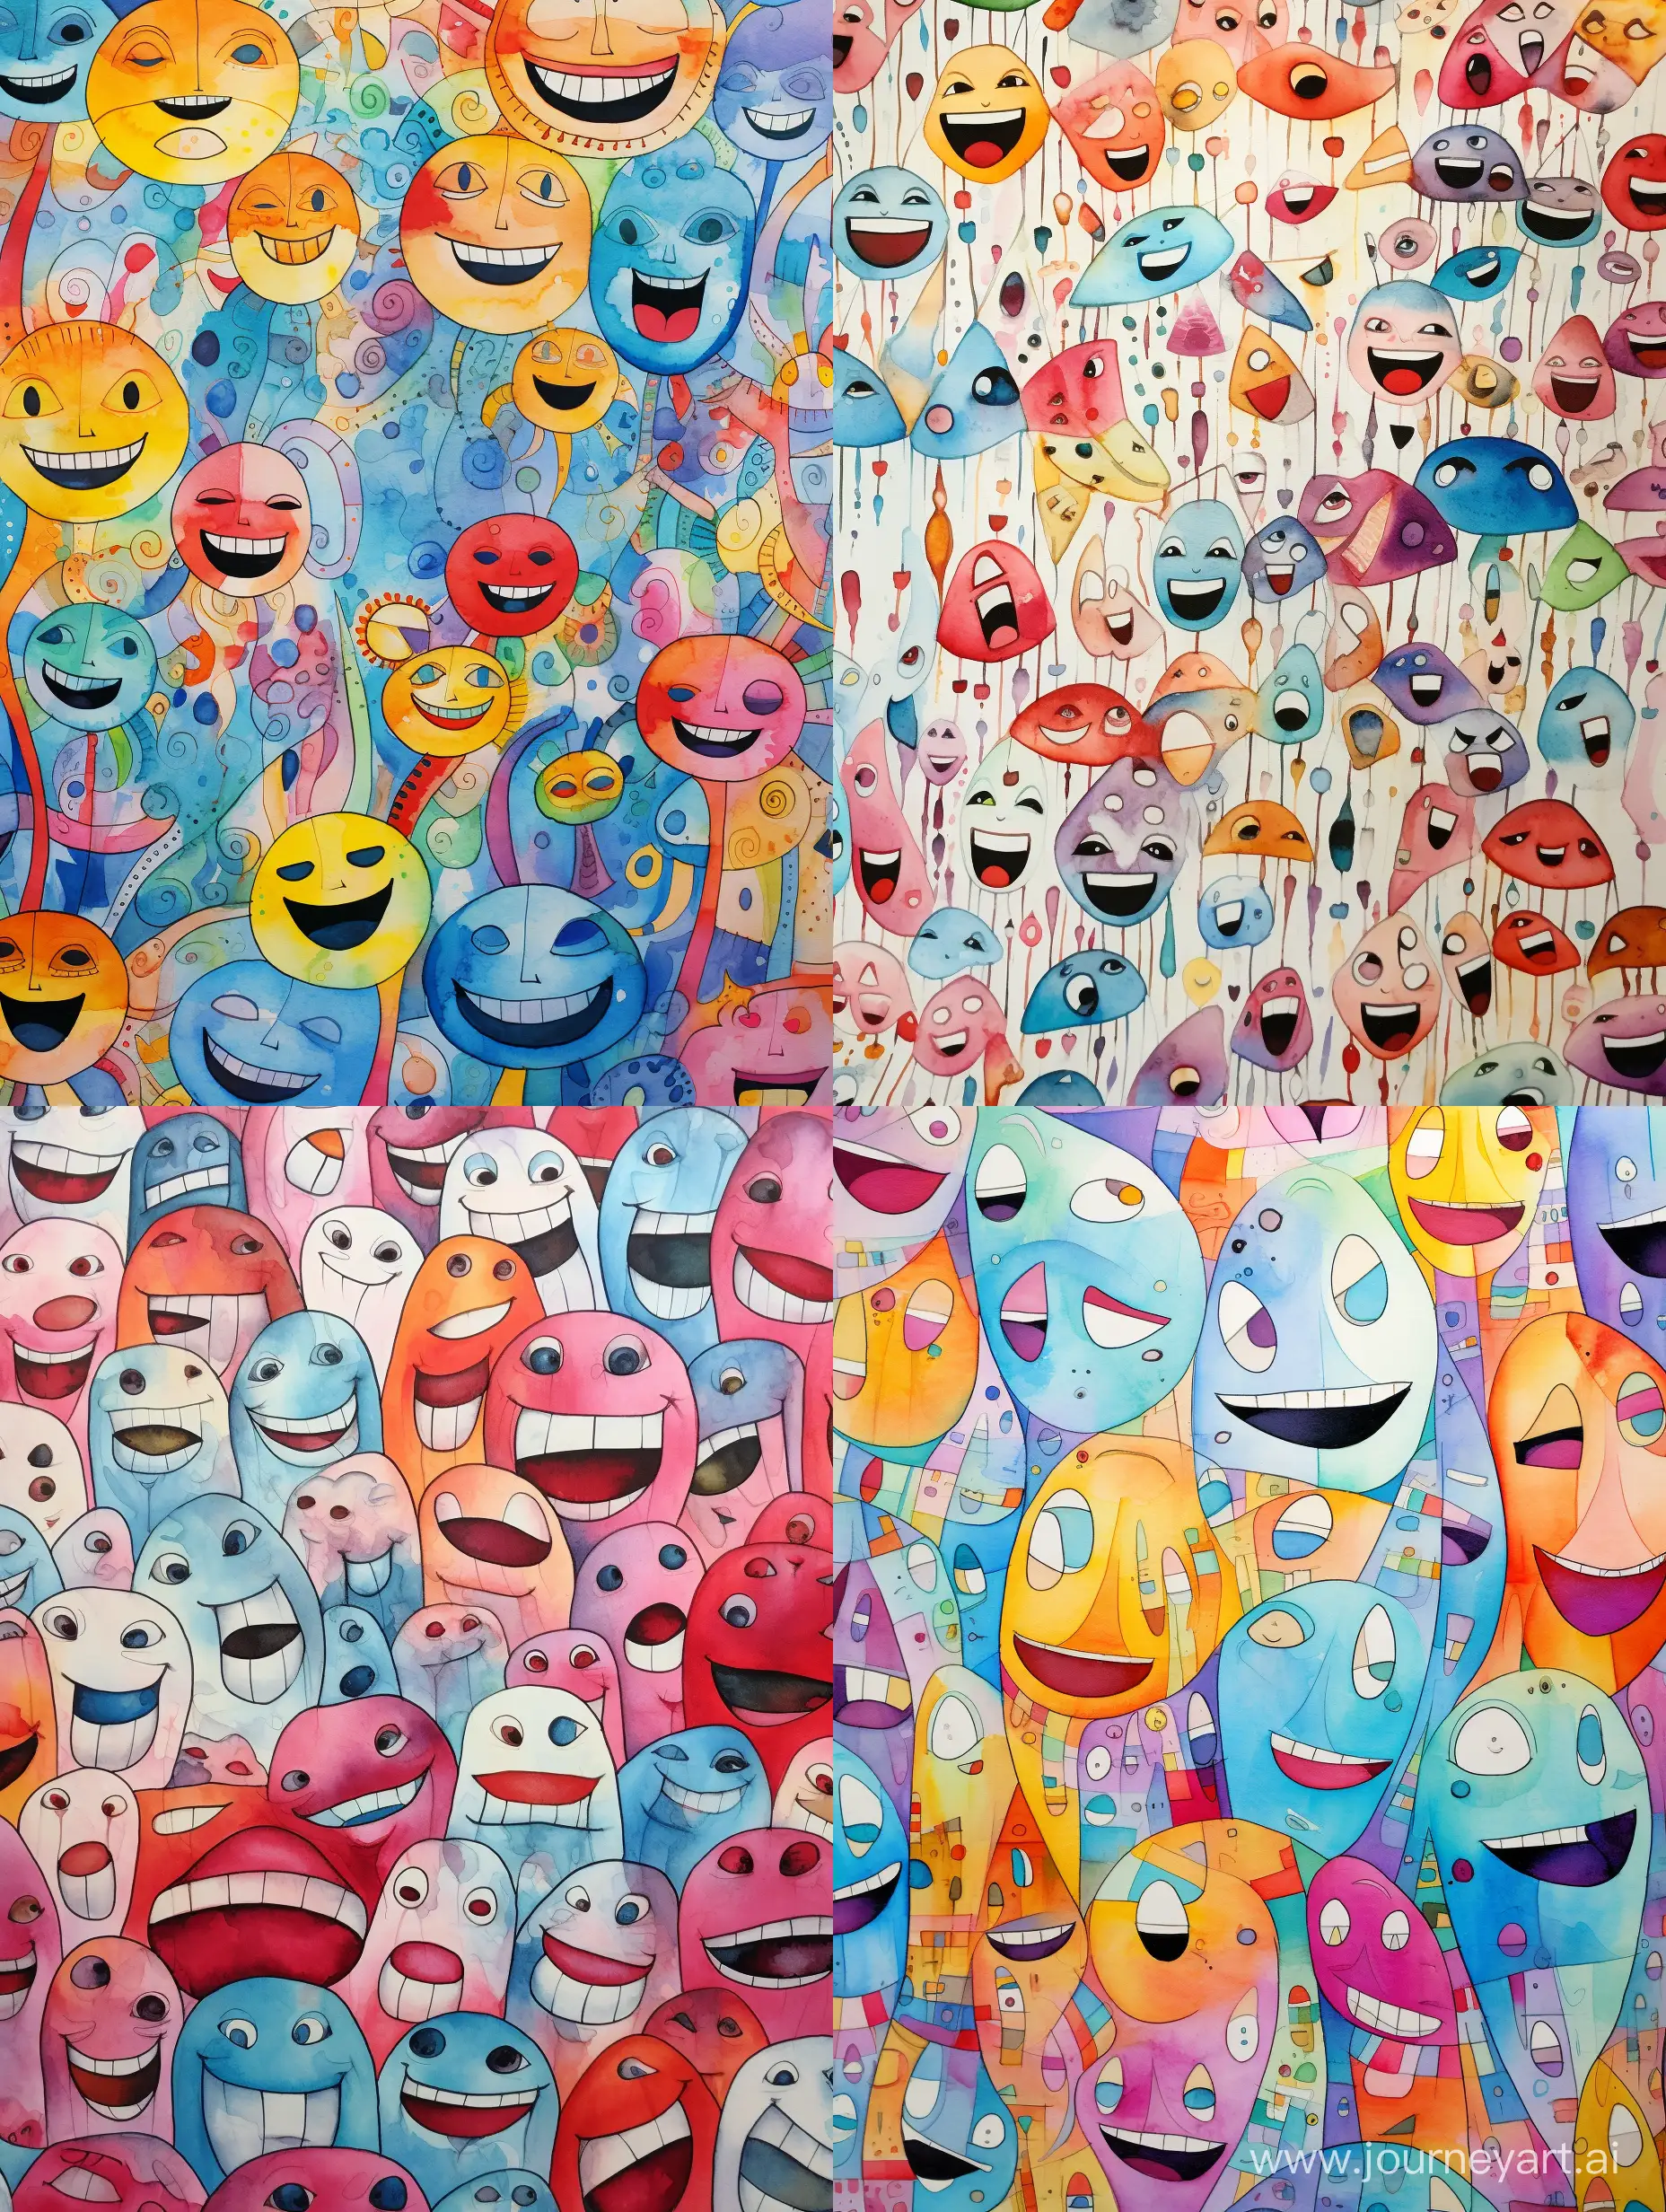 background of smiles, laughter, tears, thoughtfulness, anger, boredom, emotions stylized, small details, decorative pattern, transparent delicate colors, watercolor